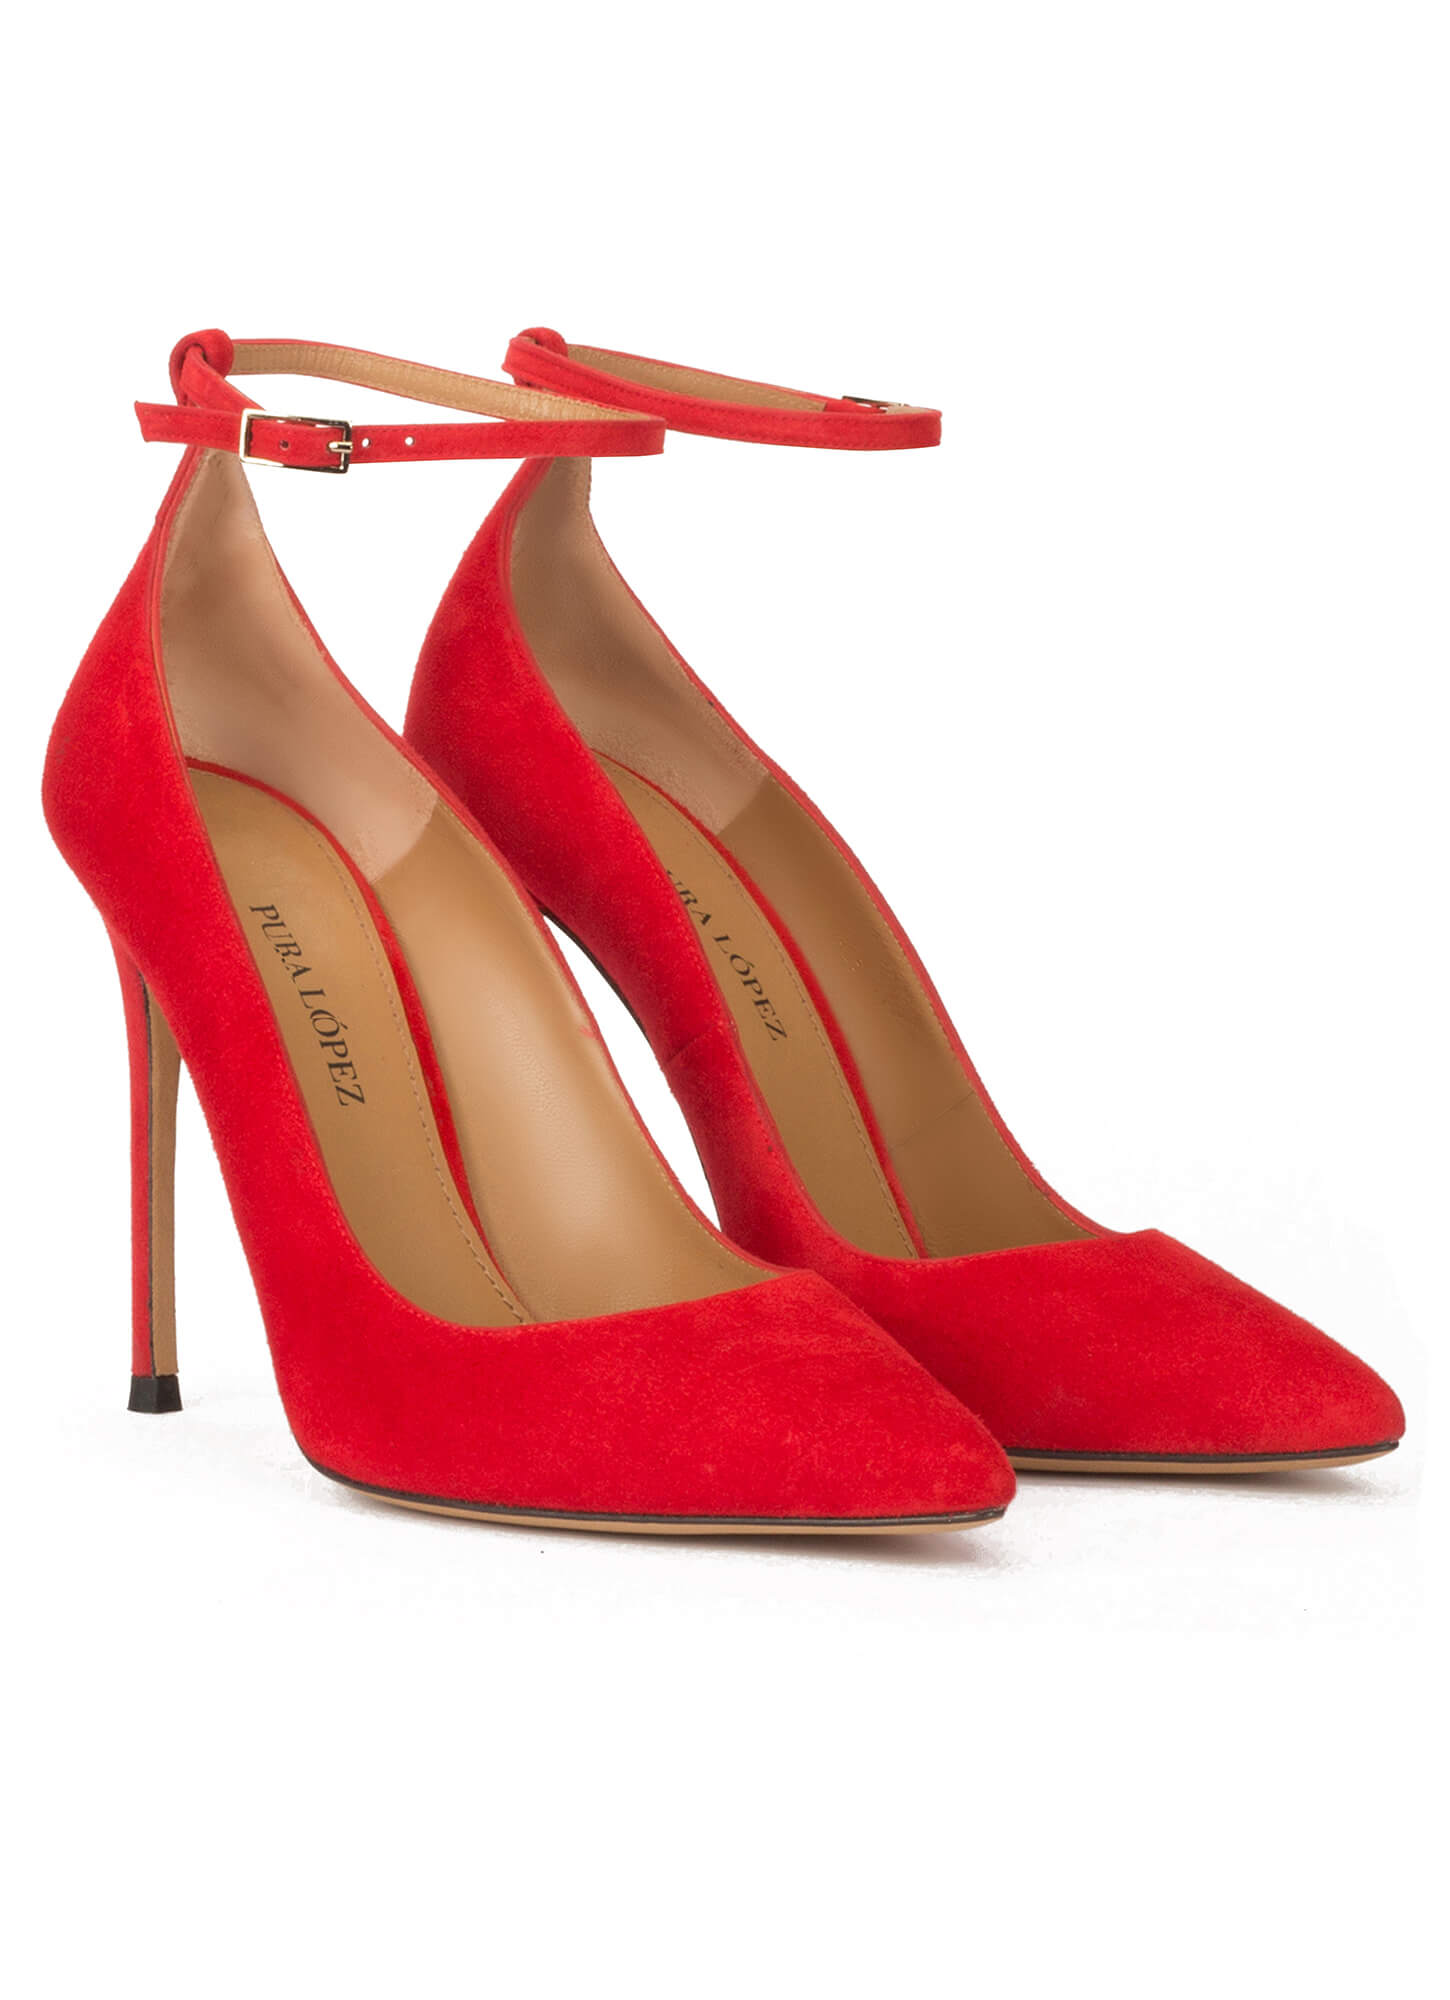 Ankle strap high heel point-toe shoes in red suede . PURA LOPEZ